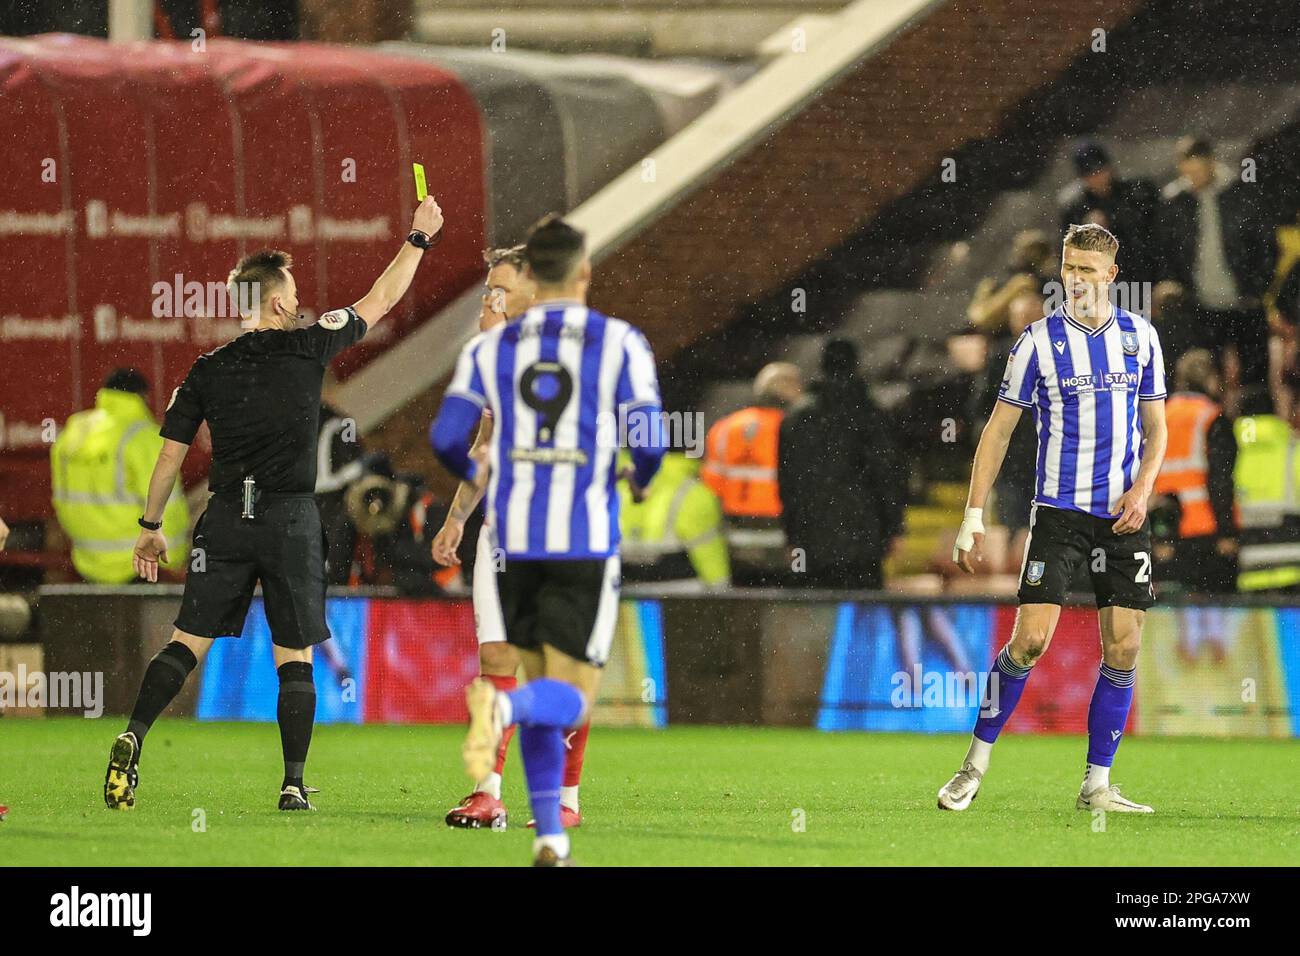 Referee Ross Joyce  gives a yellow card to Michael Smith #24 of Sheffield Wednesday during the Sky Bet League 1 match Barnsley vs Sheffield Wednesday at Oakwell, Barnsley, United Kingdom, 21st March 2023  (Photo by Mark Cosgrove/News Images) Stock Photo